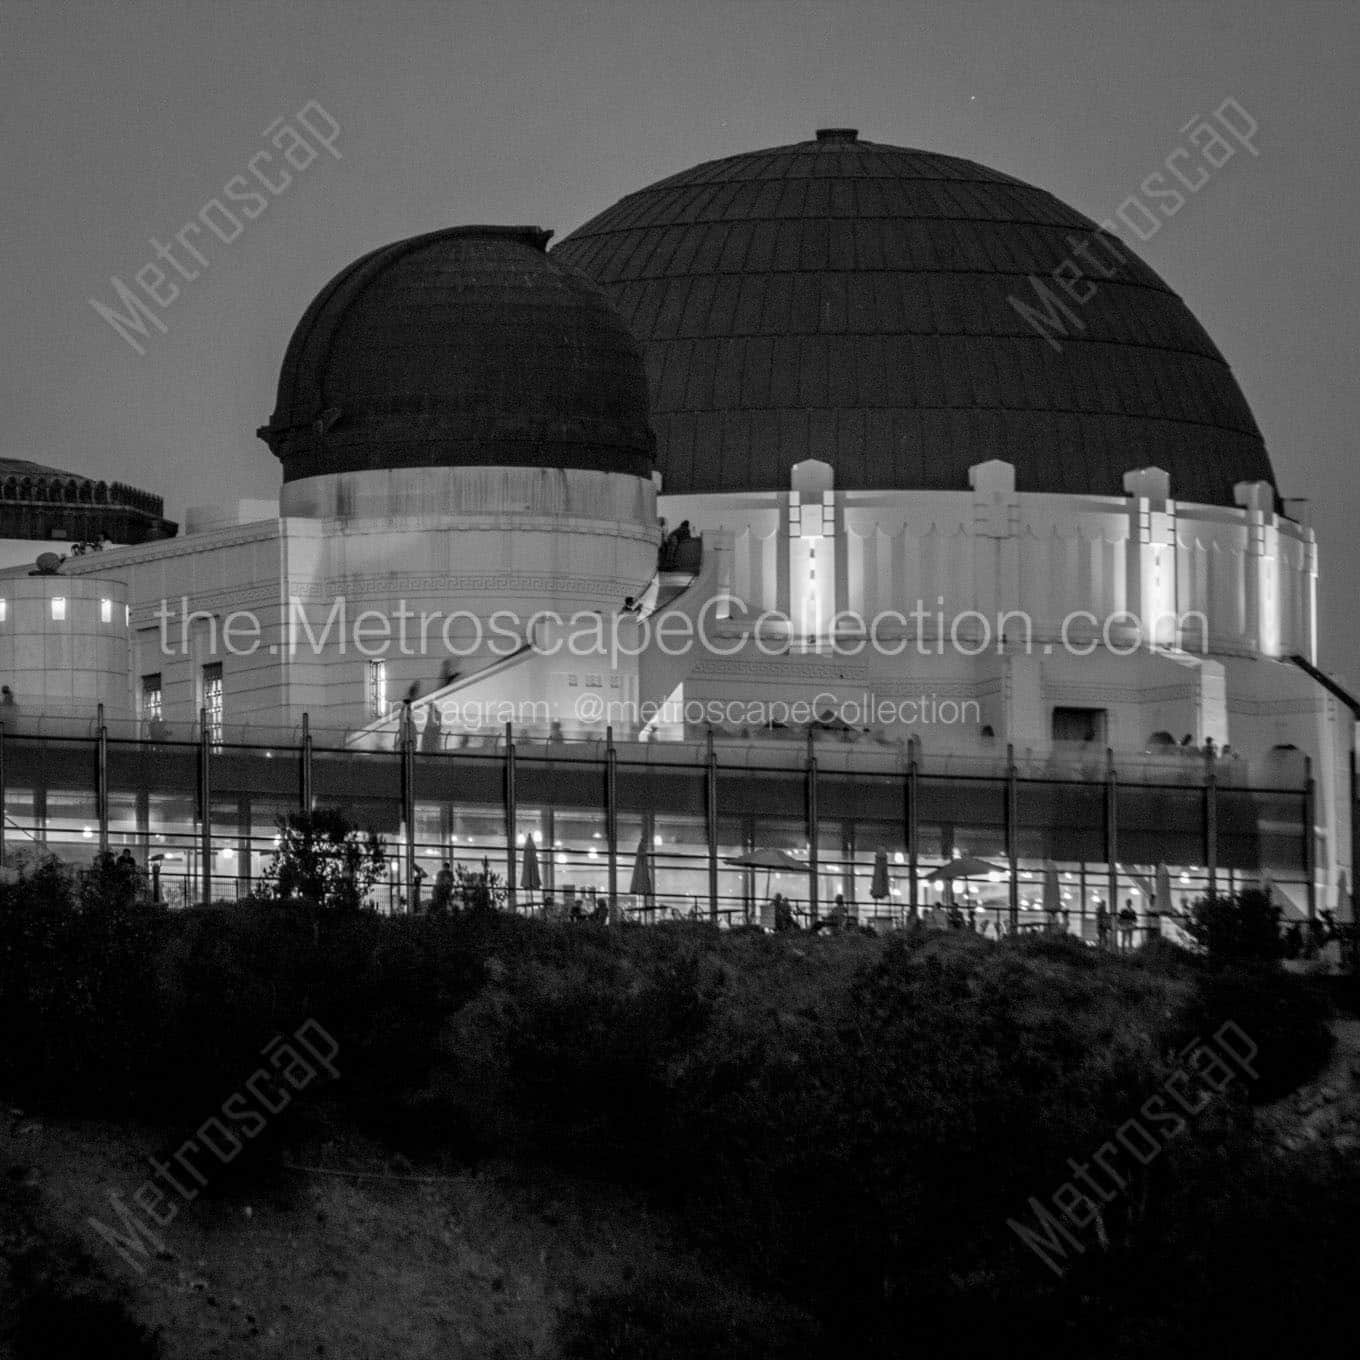 griffith observatory at night Black & White Office Art